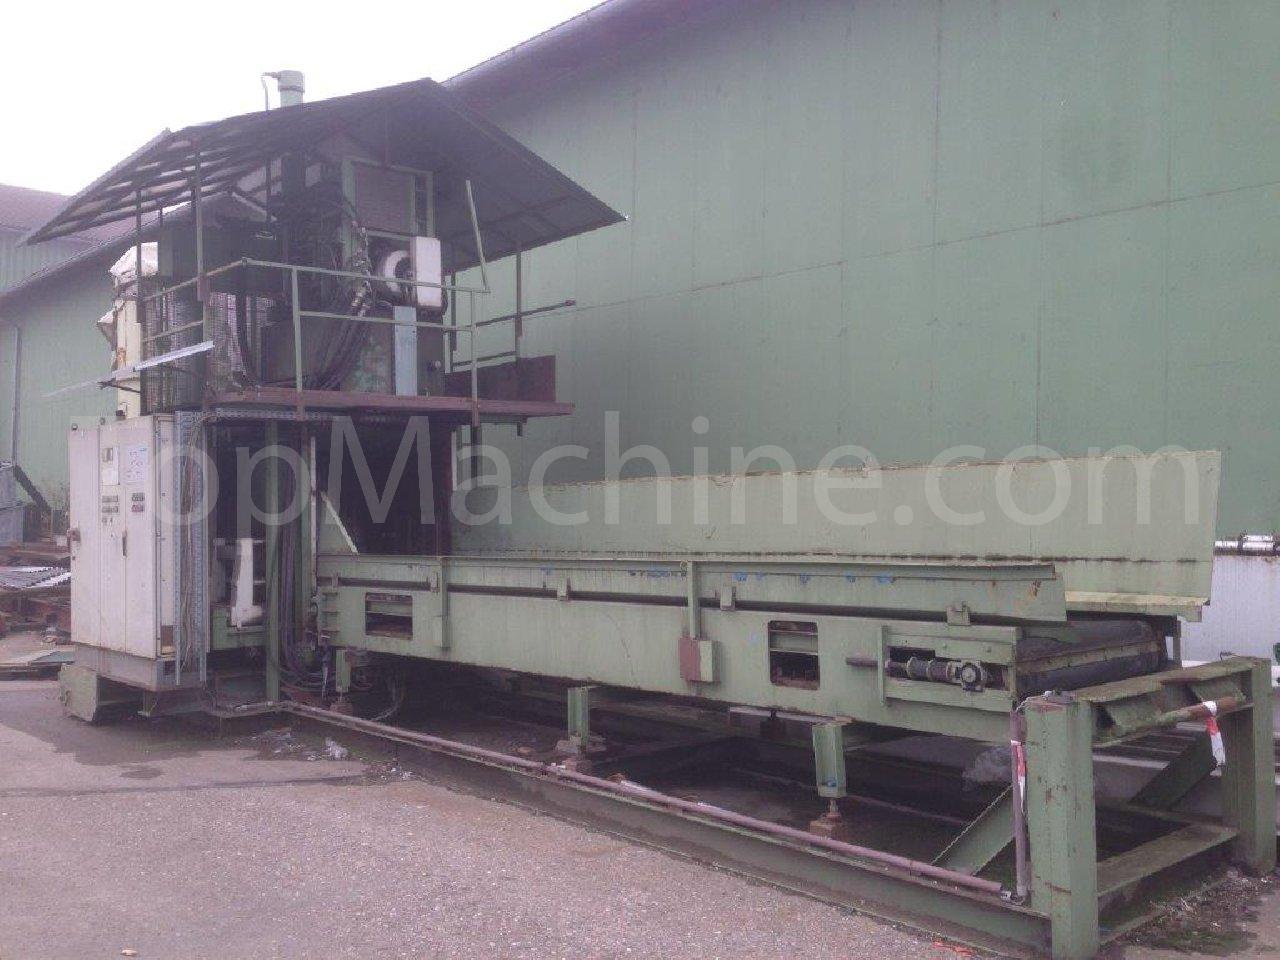 Used Pallmann PBS 1250x1250 Recycling Miscellaneous